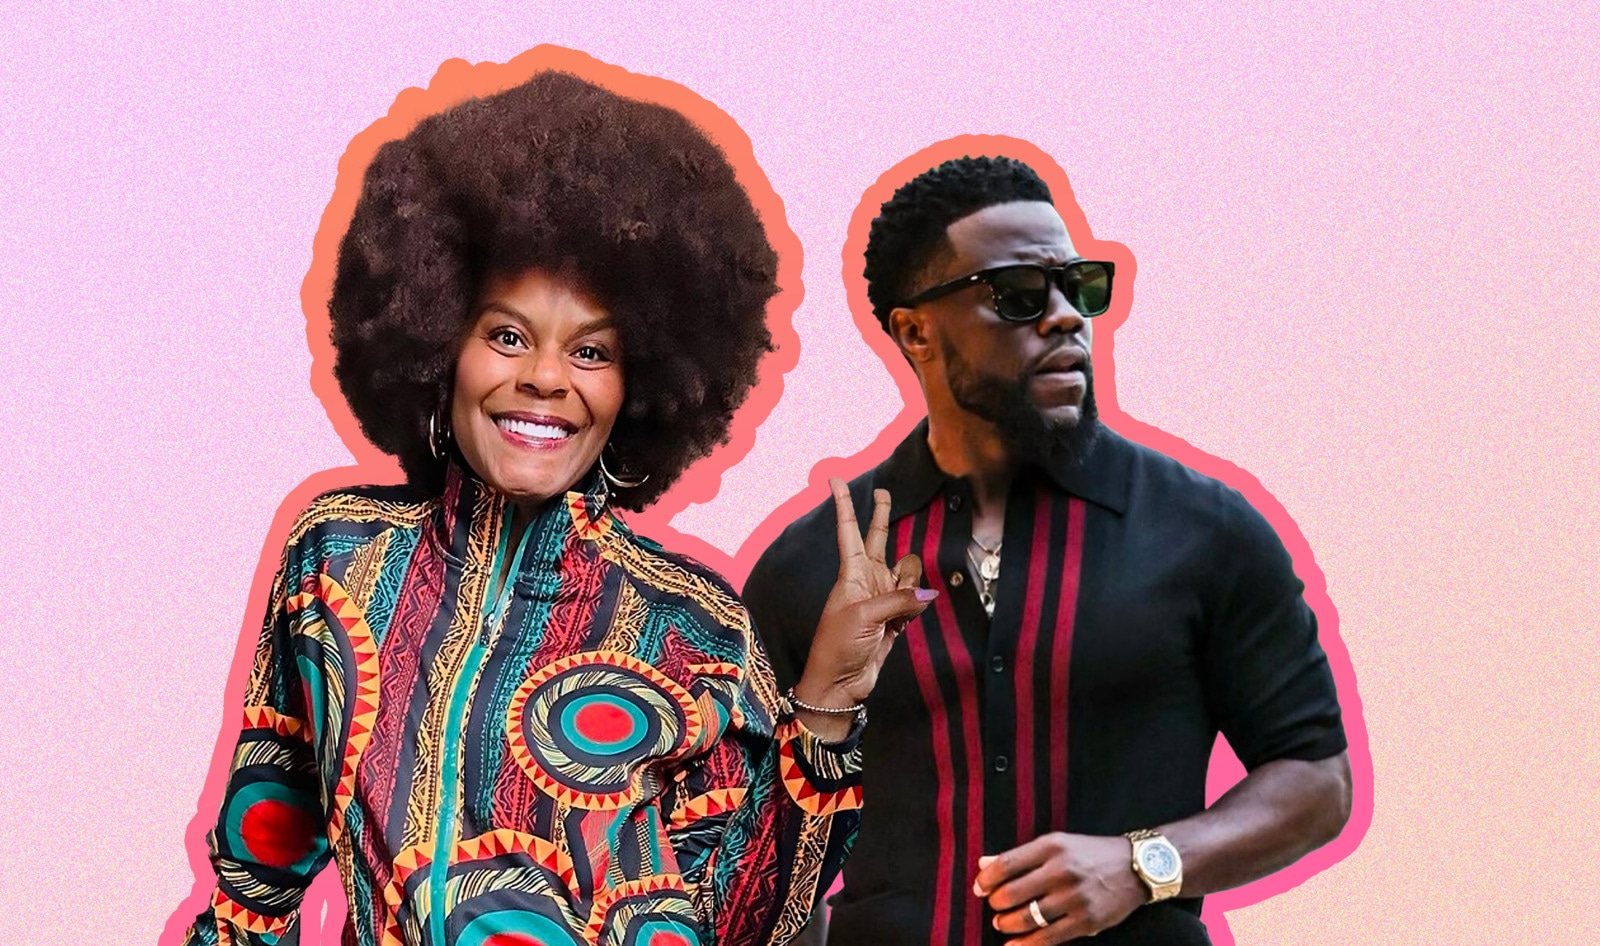 Kevin Hart and Tabitha Brown Dish on Vegan Food, Authenticity, and Why Feeling Good Matters